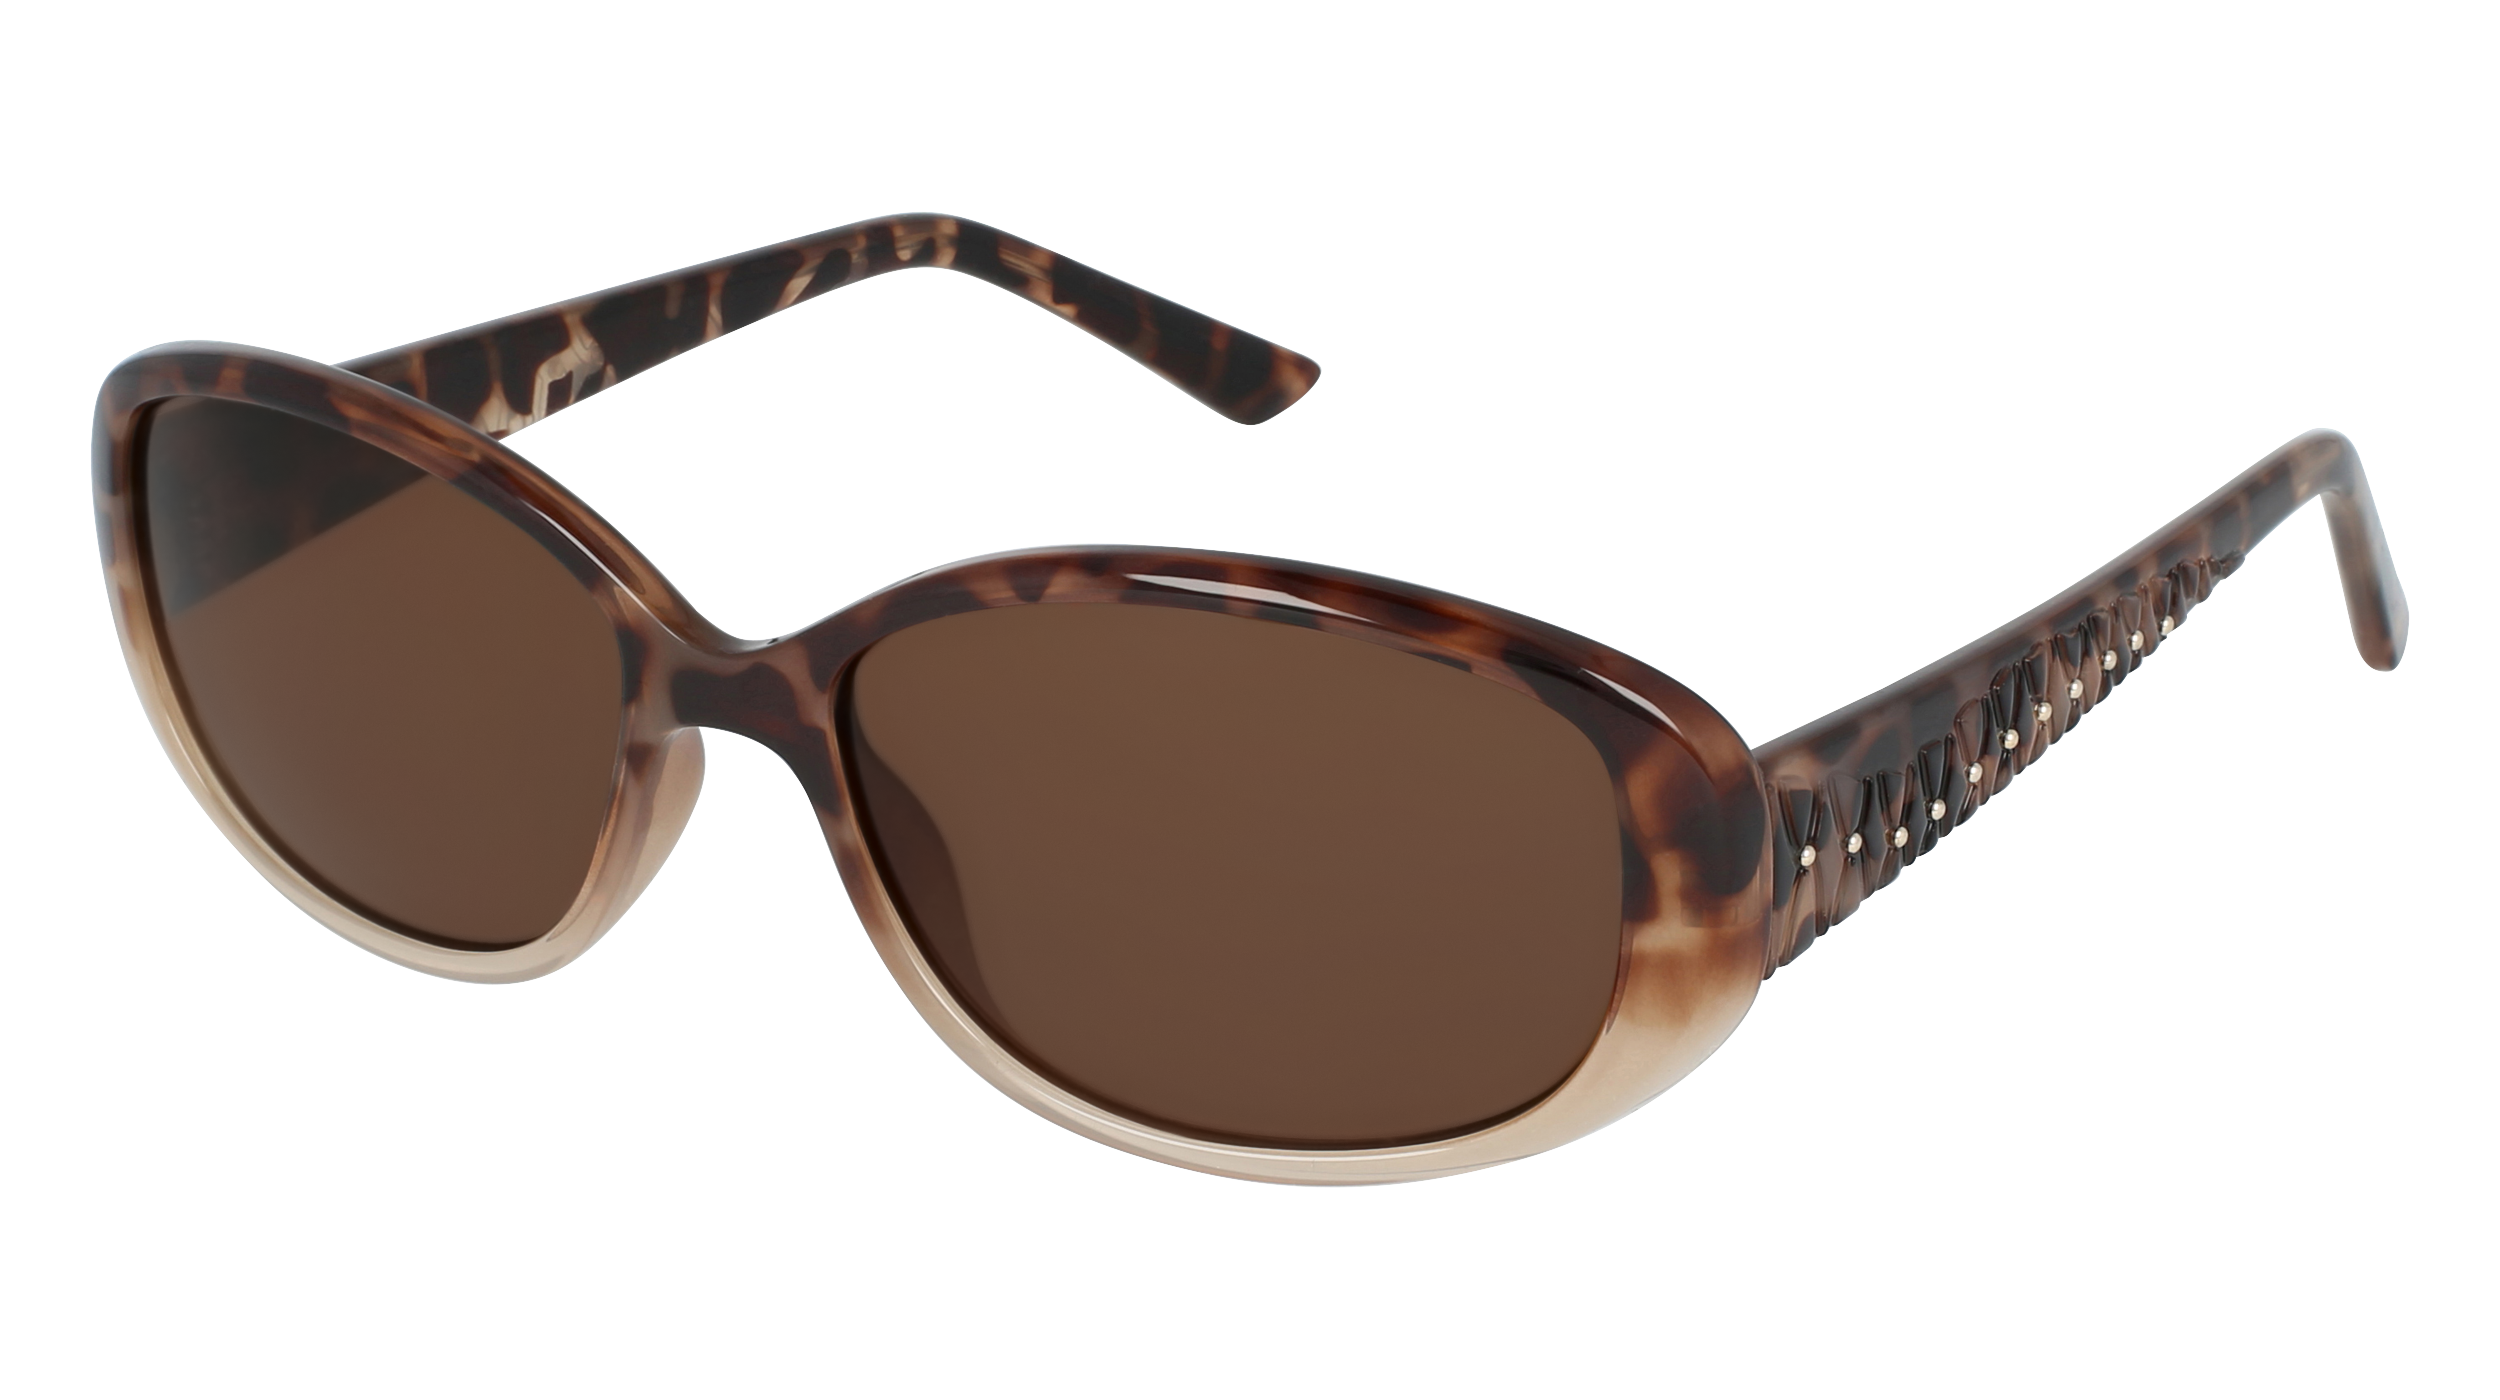 N S 714 women's sunglasses (from the side)